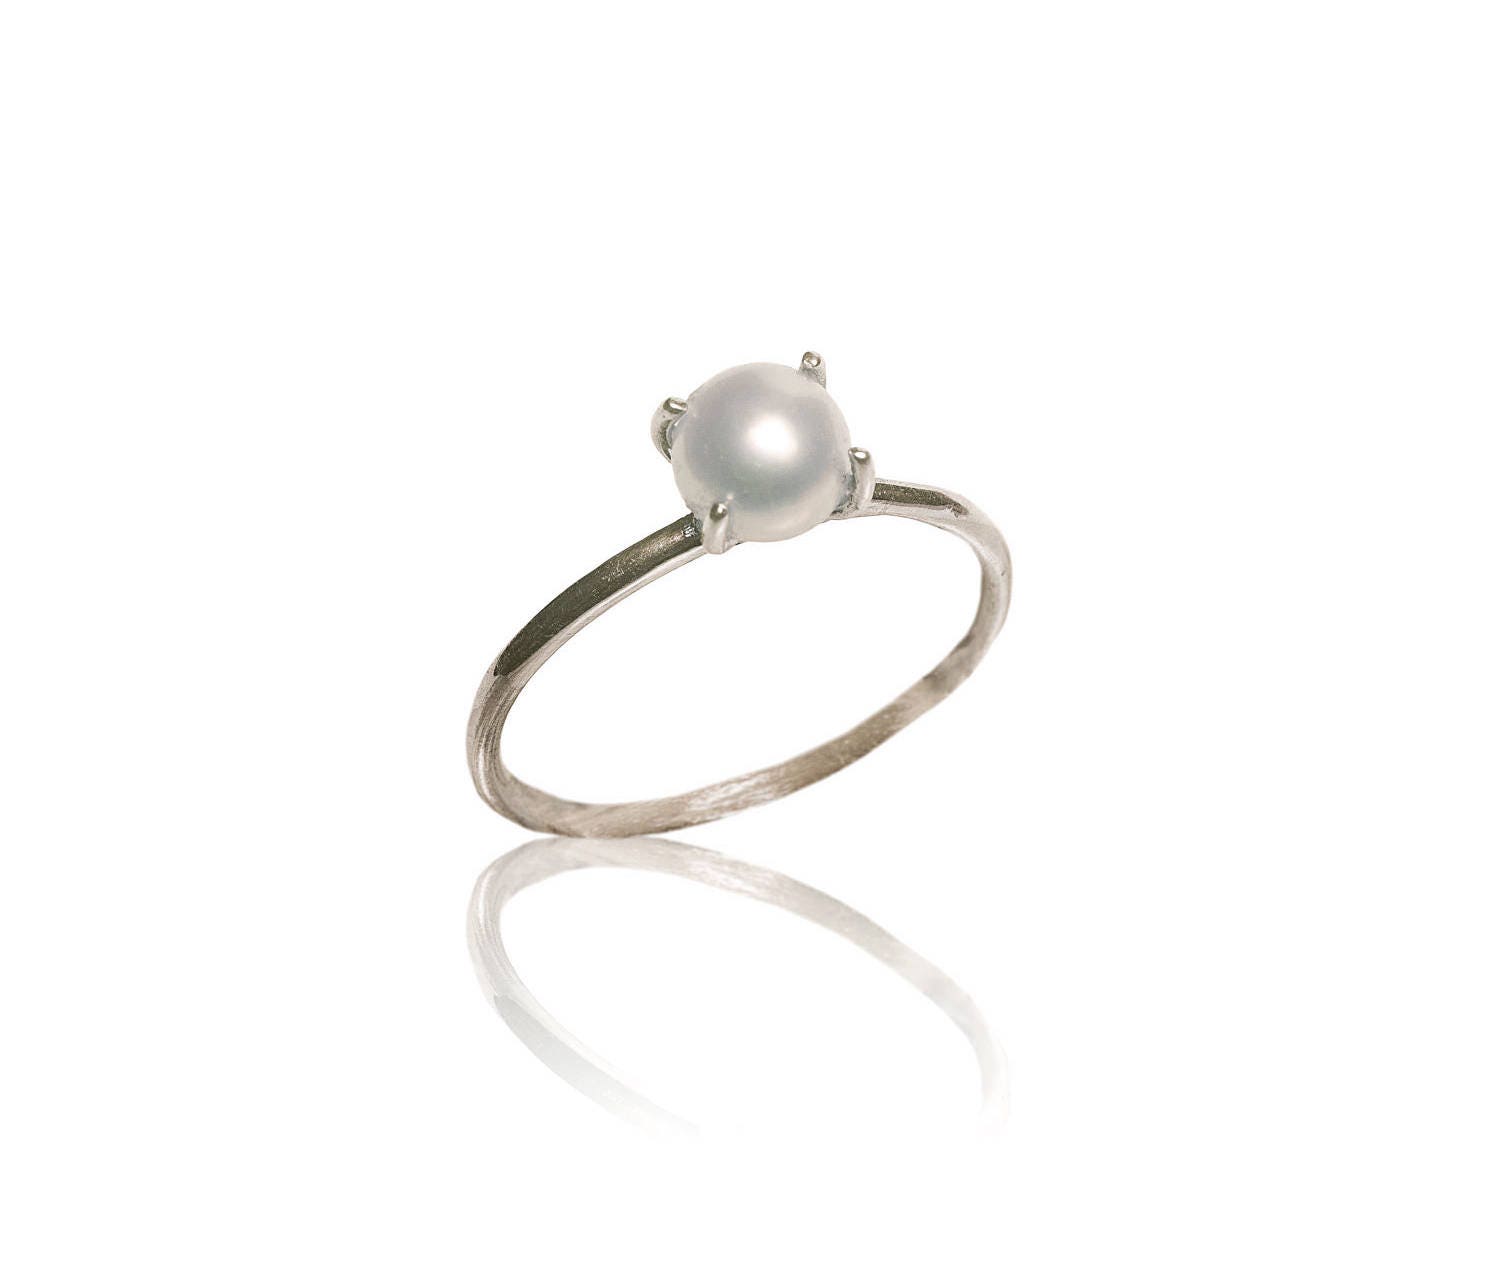 Natural Pearl Ring, Classic Infinity Ring With Cubic Zirconia Stones & Pearl,  Freshwater White Pearl for Woman in Sterling Silver. - Etsy | Pearl jewelry  ring, Natural pearl ring, Silver ring designs